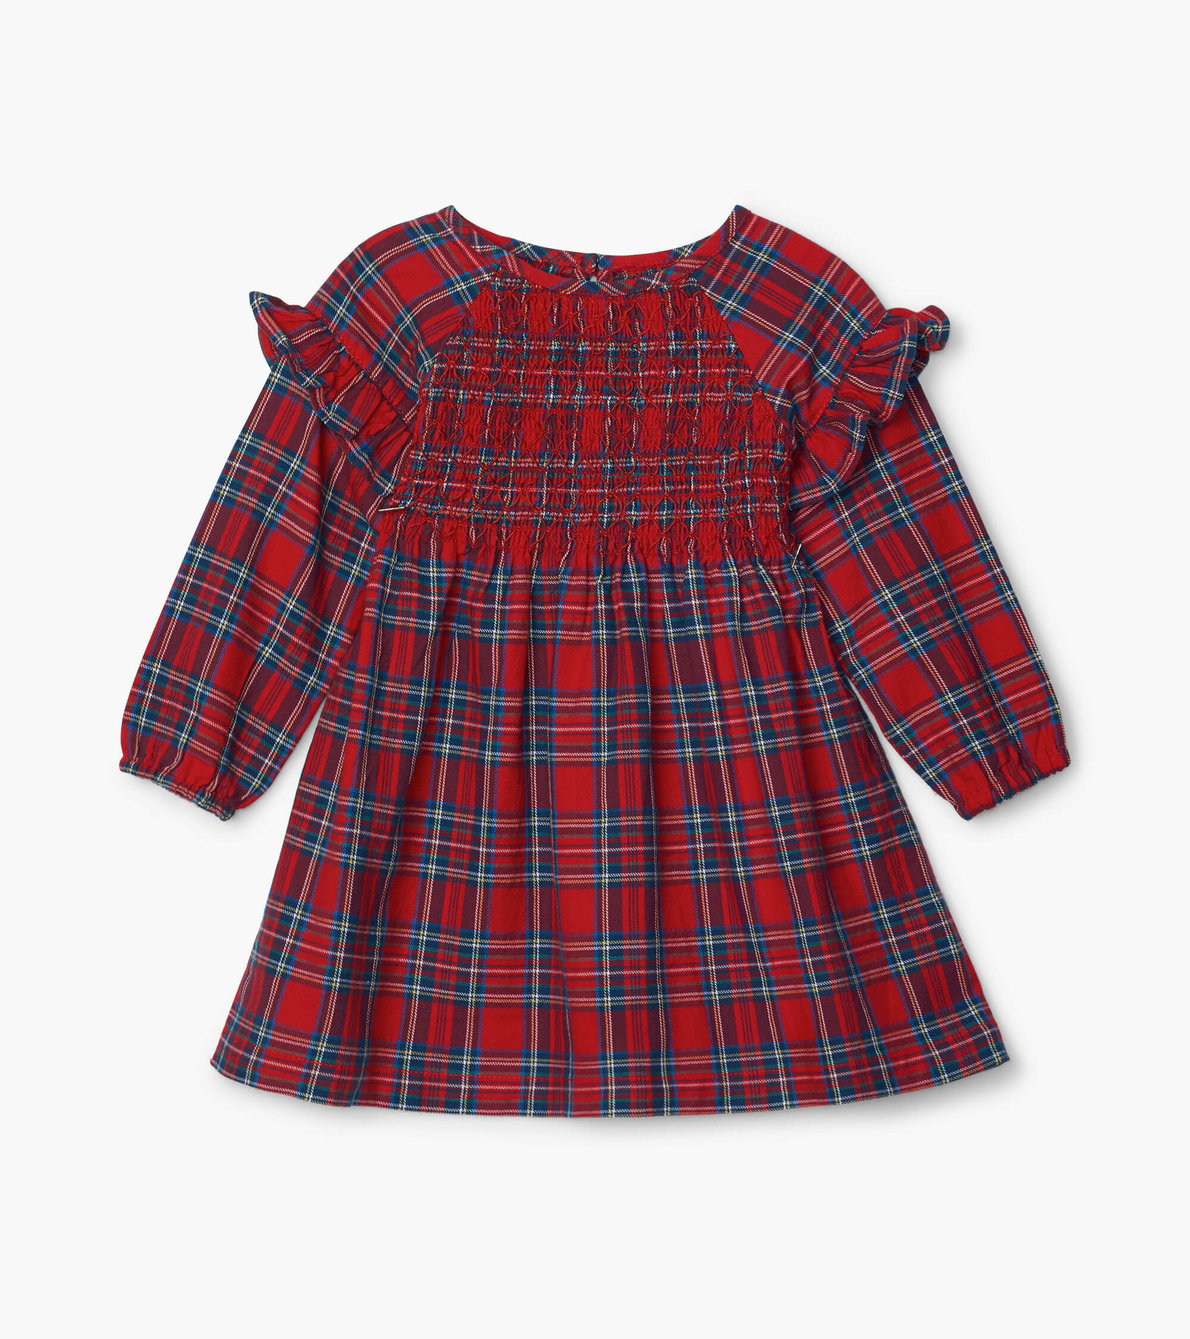 View larger image of Holiday Plaid Baby Smocked Party Dress